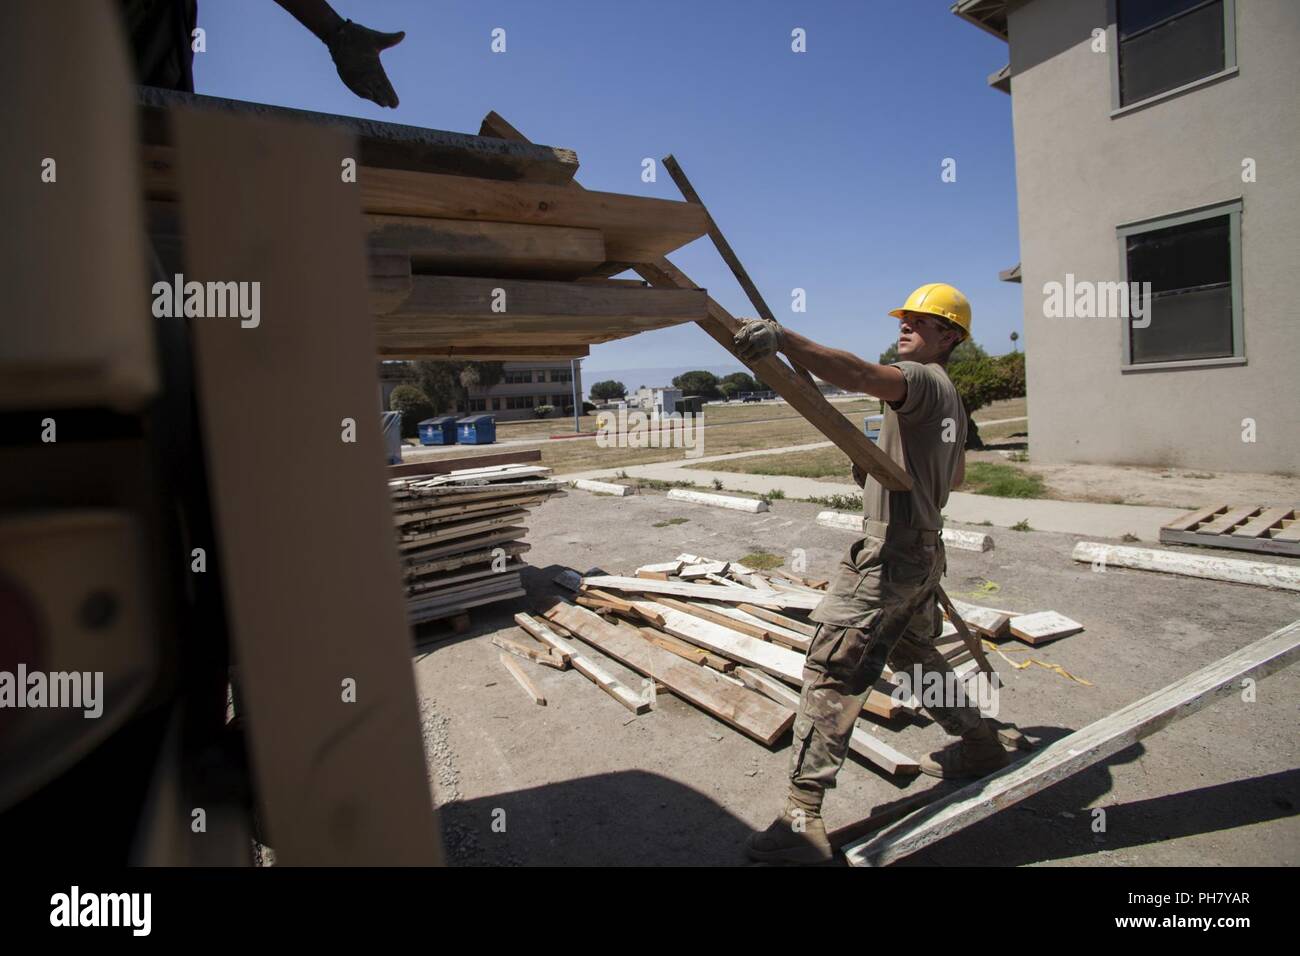 U.S. Army Pfc. Dominic Steveley, a carpentry/masonry specialist with the 315th Vertical Construction Company, 250th Military Intelligence Battalion, 100th Troop Command, 40th Infantry Division, California National Guard, loads wood into the back of a vehicle, June 27, 2018, while working on construction projects at Joint Forces Training Base, Los Alamitos, California. Engineers from the 315th VCC are working on renovations and creating new infrastructure, including sidewalks and trash enclosures, during their annual training. Stock Photo